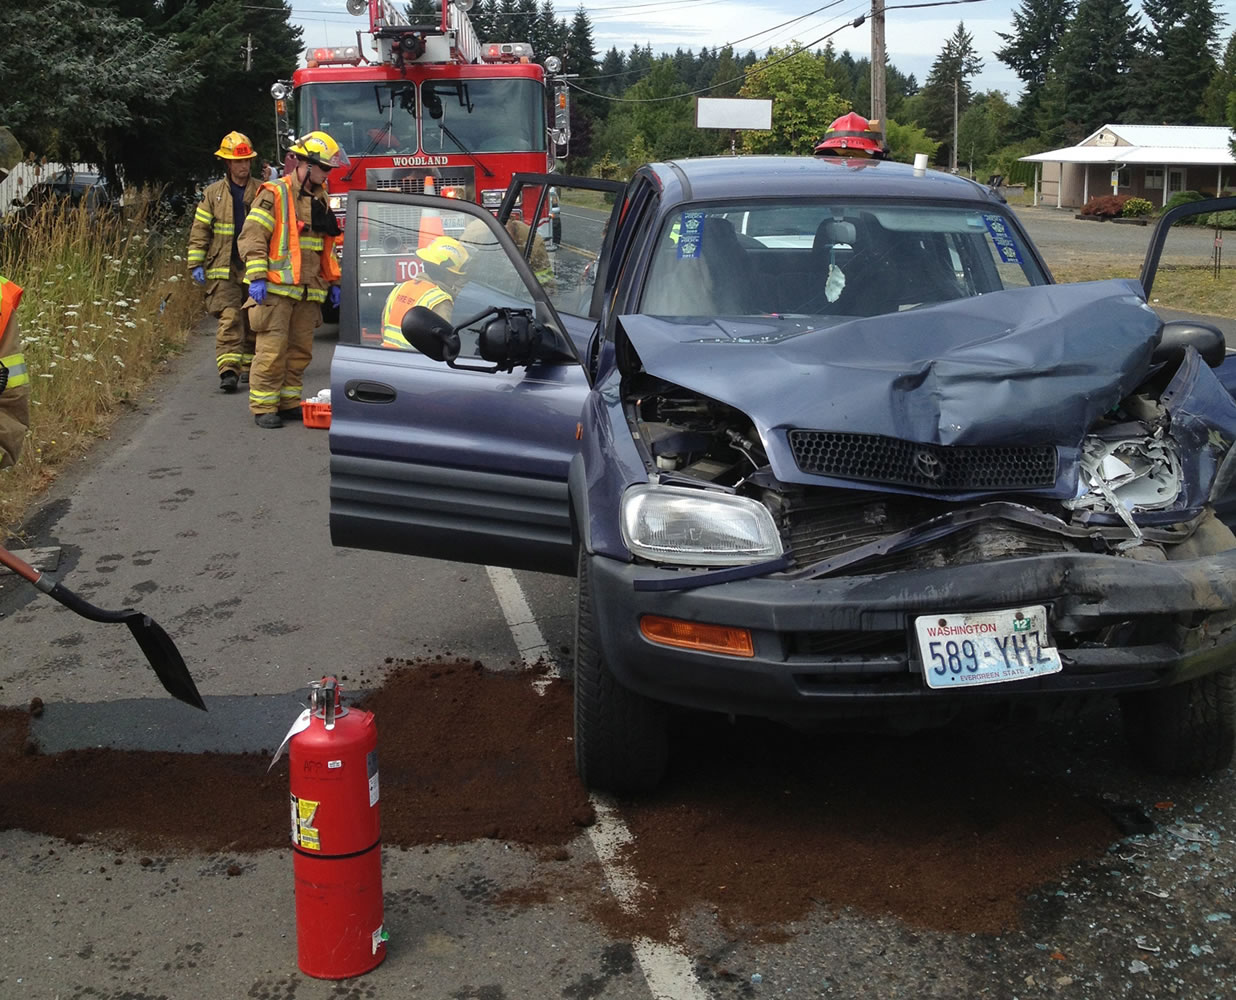 This Toyota SUV rear-ended a pickup truck on Highway 502, blocking traffic for 30 minutes.